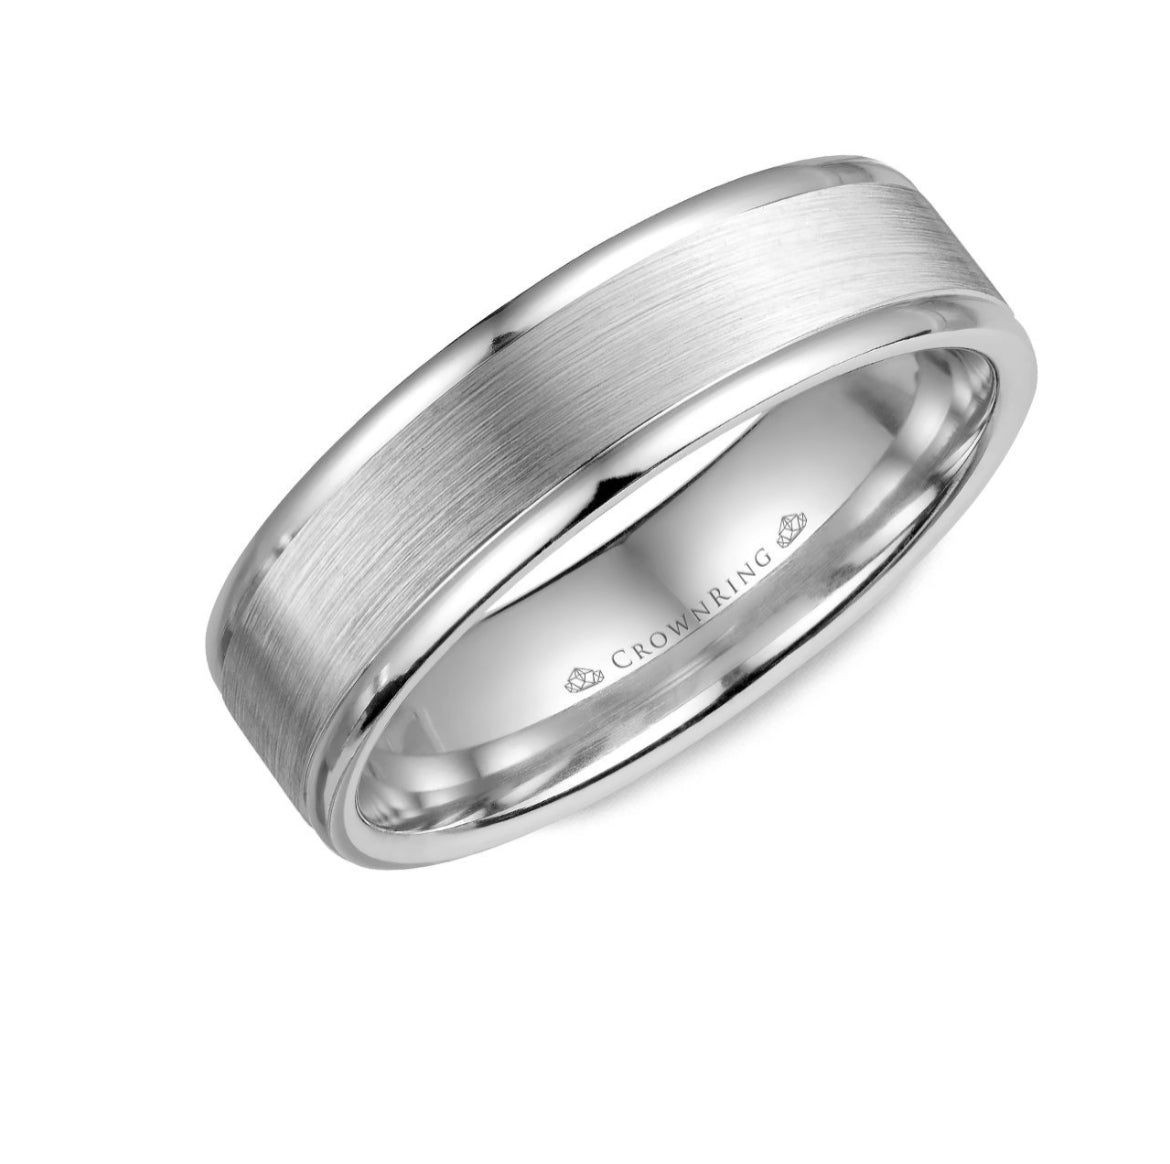 CrownRing Collection - 14k White Gold 6mm Flat Edge With Satin Finish